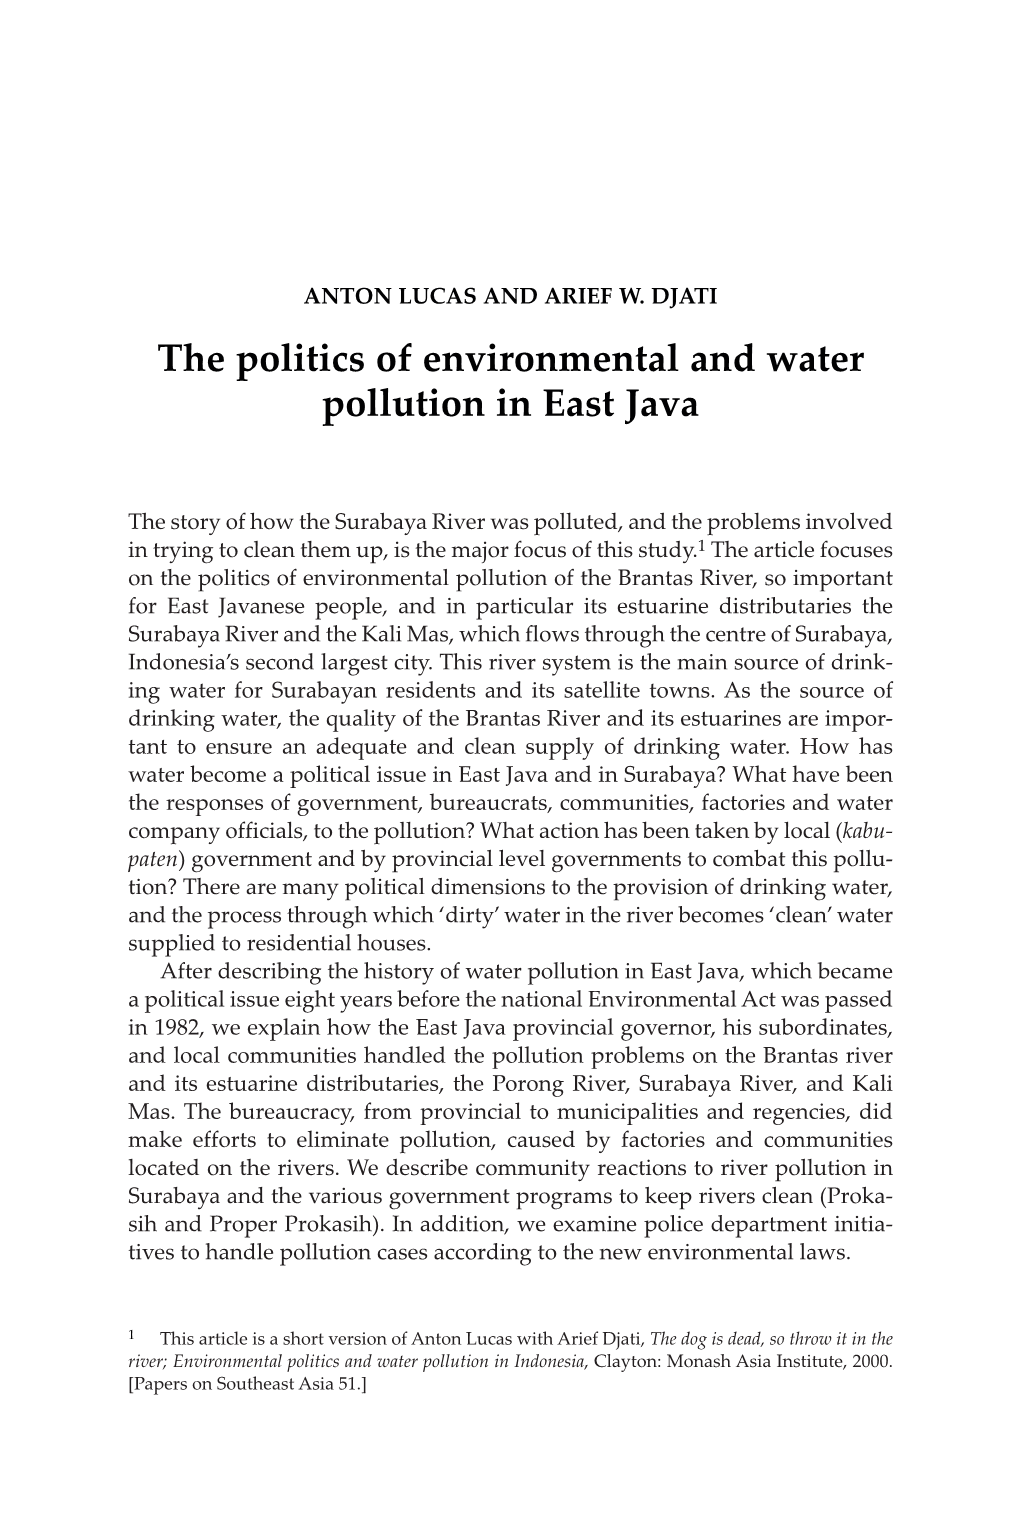 The Politics of Environmental and Water Pollution in East Java